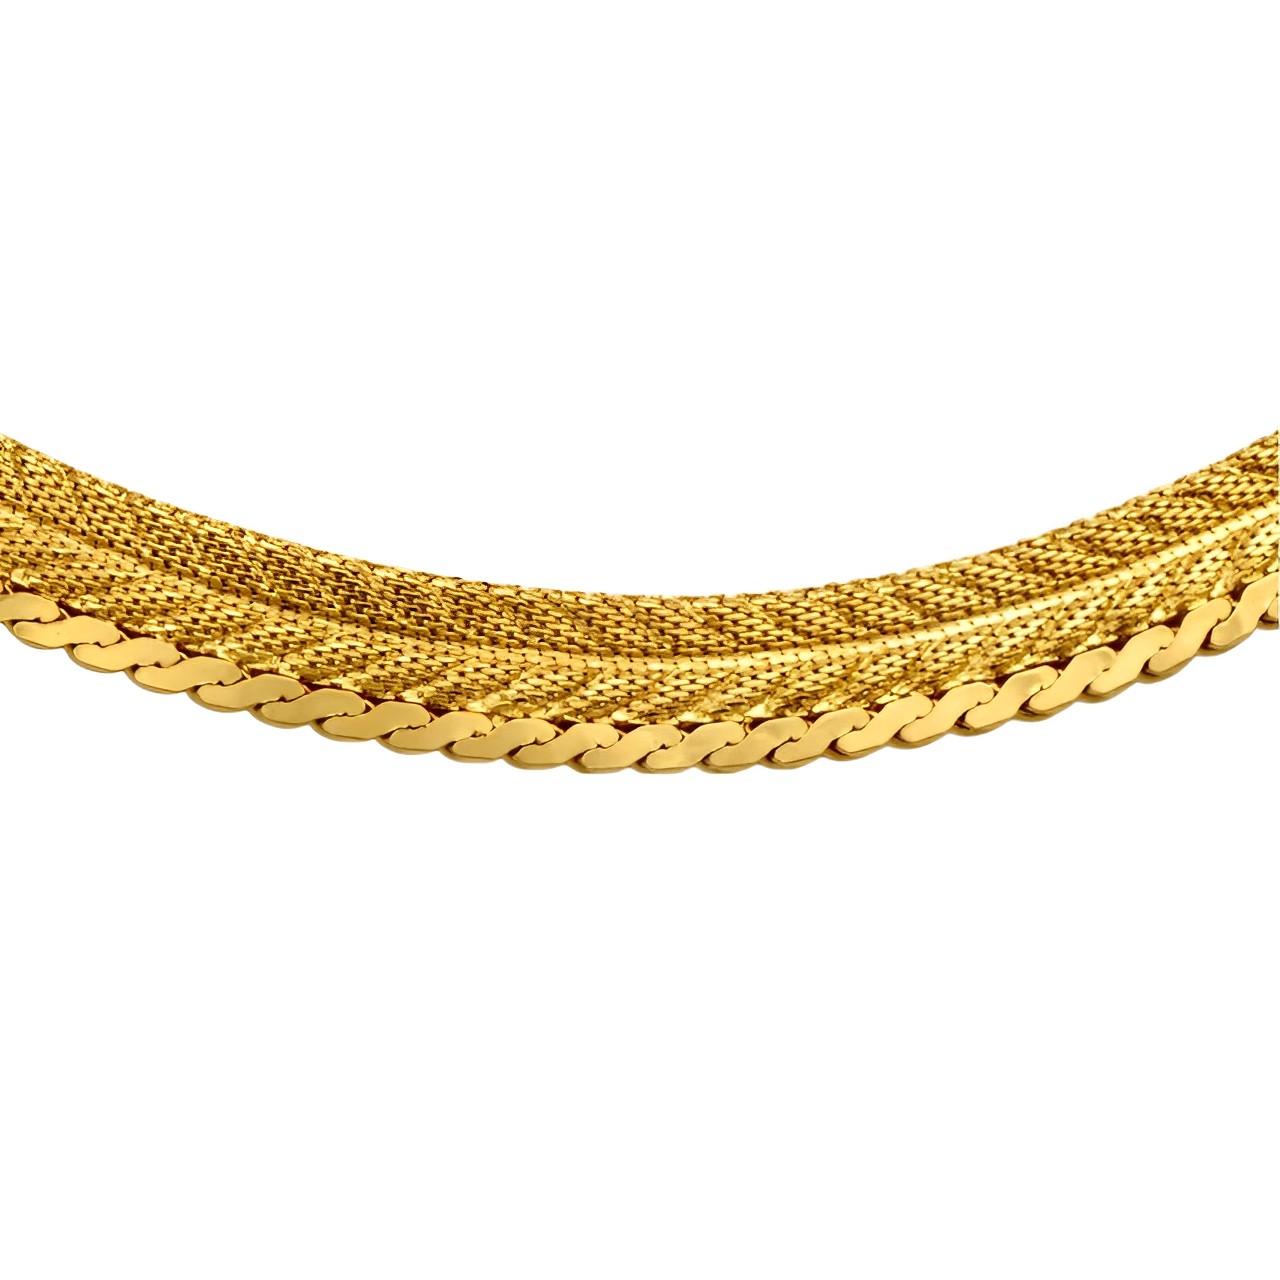 Gold Plated Chevron Mesh and Shiny Serpentine Collar Necklace circa 1980s For Sale 1